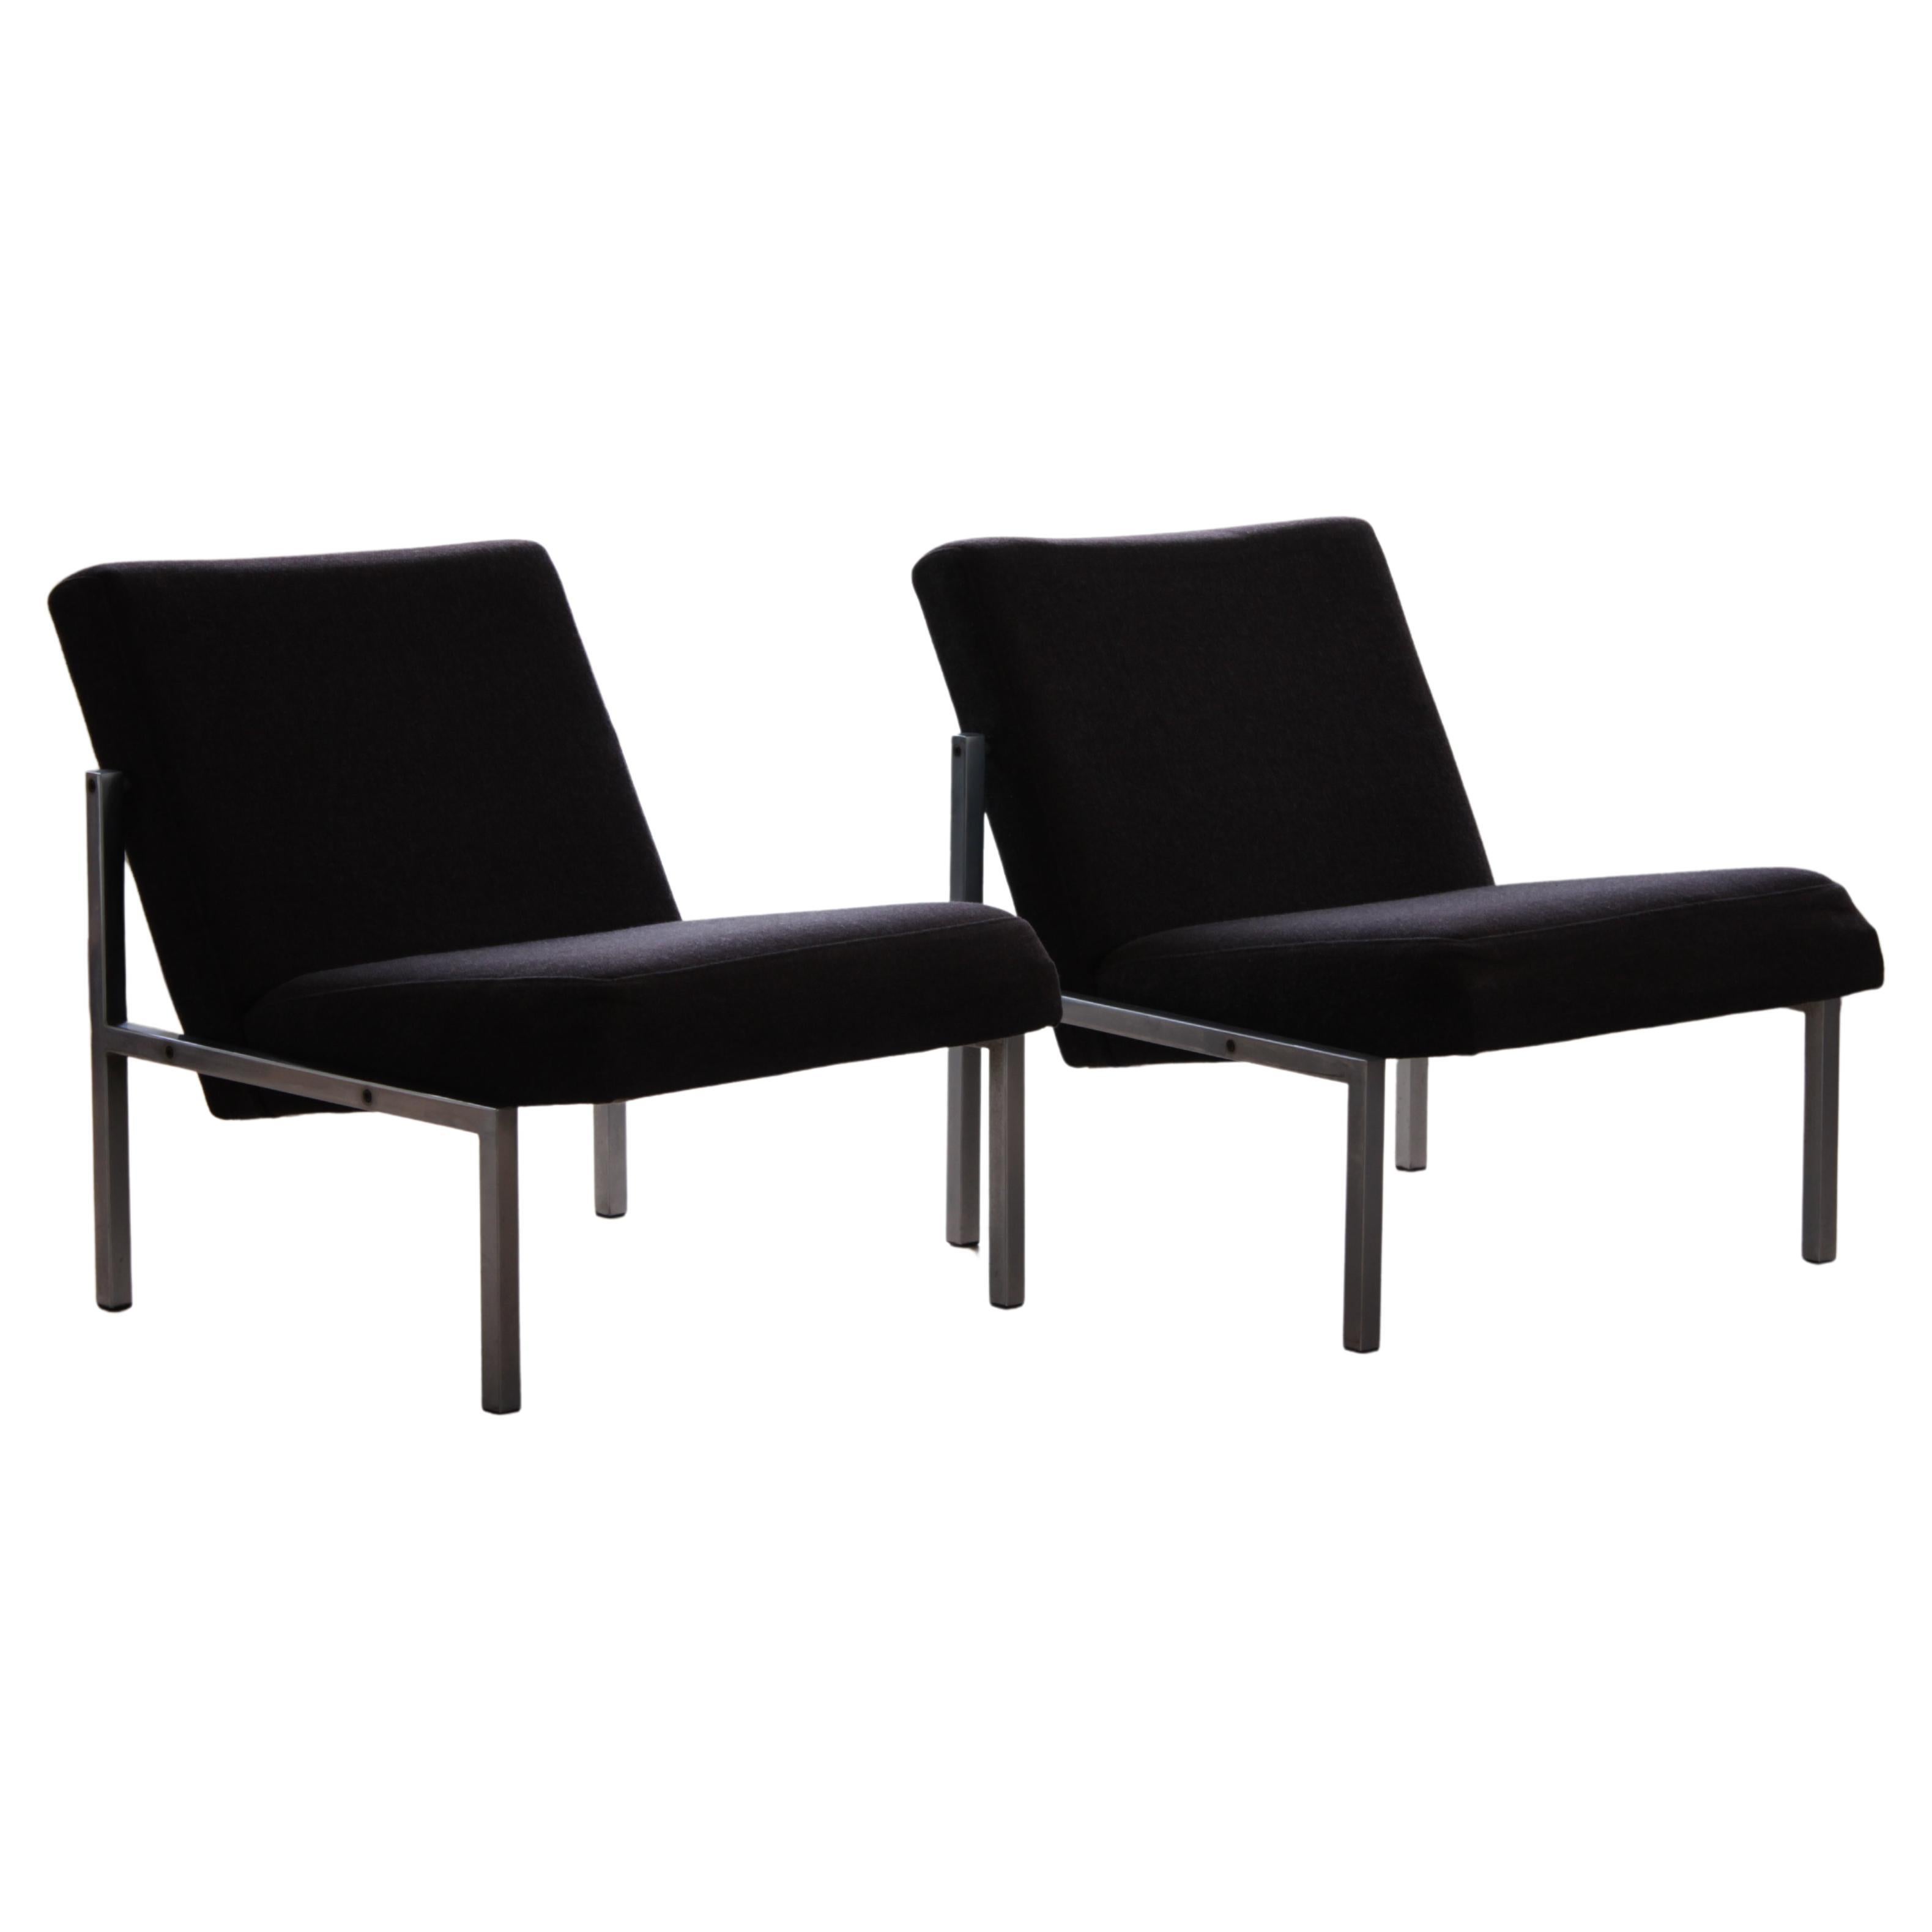 Pair of SZ11 Lounge Chairs by Martin Visser for 't Spectrum, 1960s